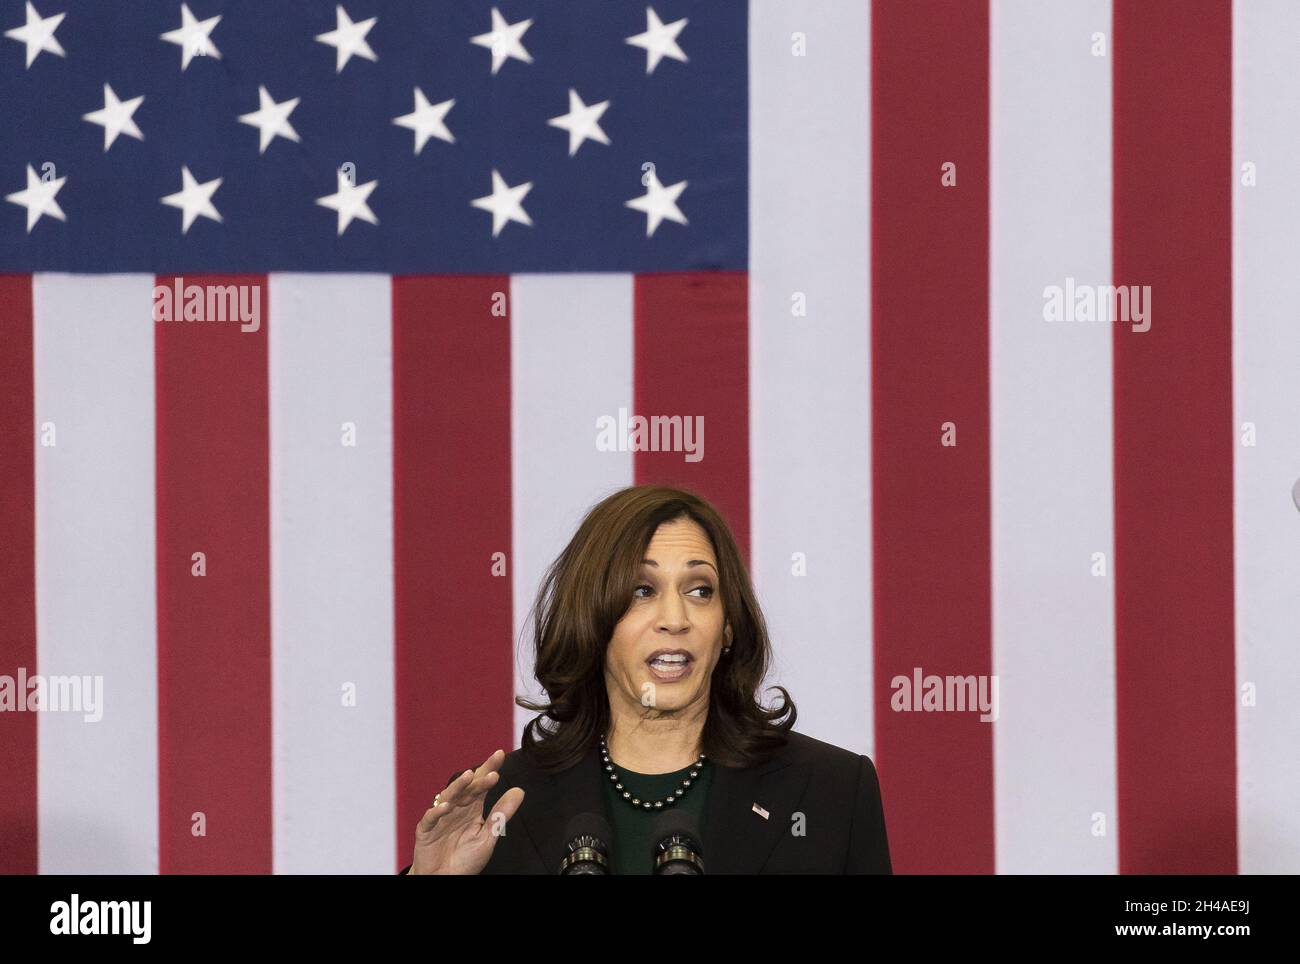 New York, United States. 01st Nov, 2021. U.S. Vice President Kamala Harris speaks at an event promoting the Biden administration's Build Back Better agenda and and clean energy solutions in a Port Authority of New York and New Jersey hangar at John F. Kennedy International airport in the Queens borough of New York, New York, on Monday, November 1, 2021. Photo by Justin Lane/UPI Credit: UPI/Alamy Live News Stock Photo